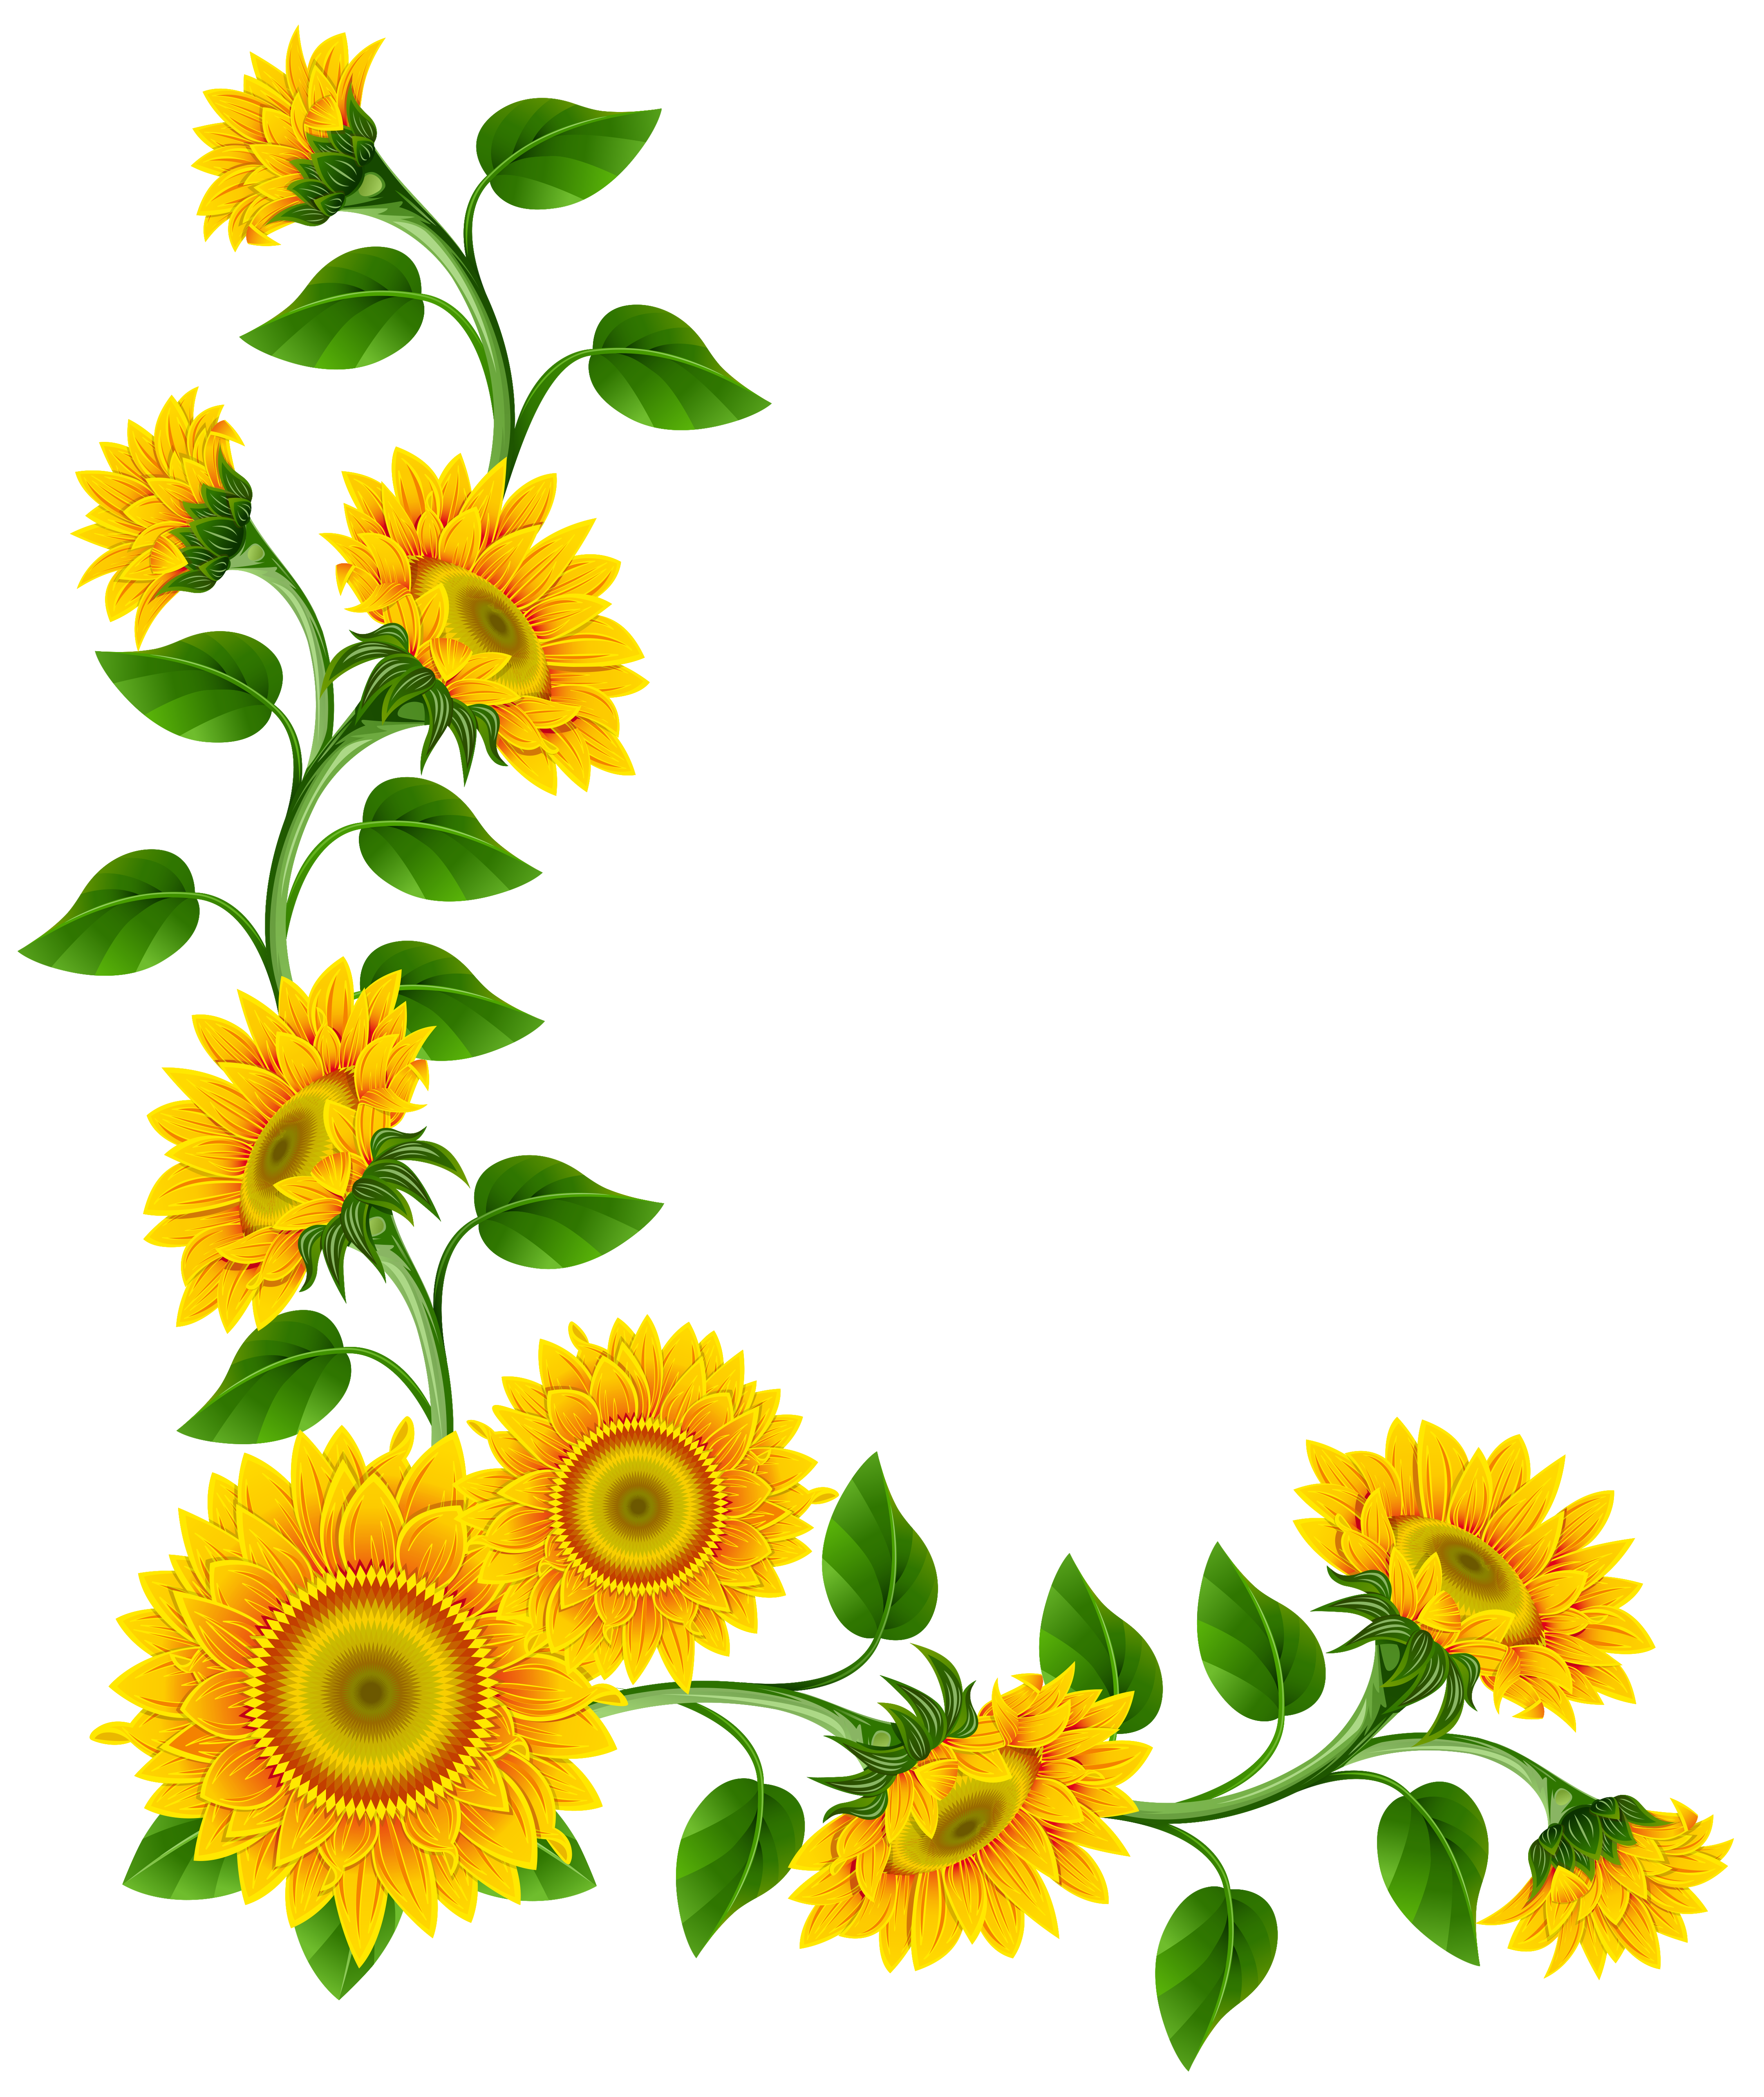 Poppy clipart border paper. Sunflower decoration png image